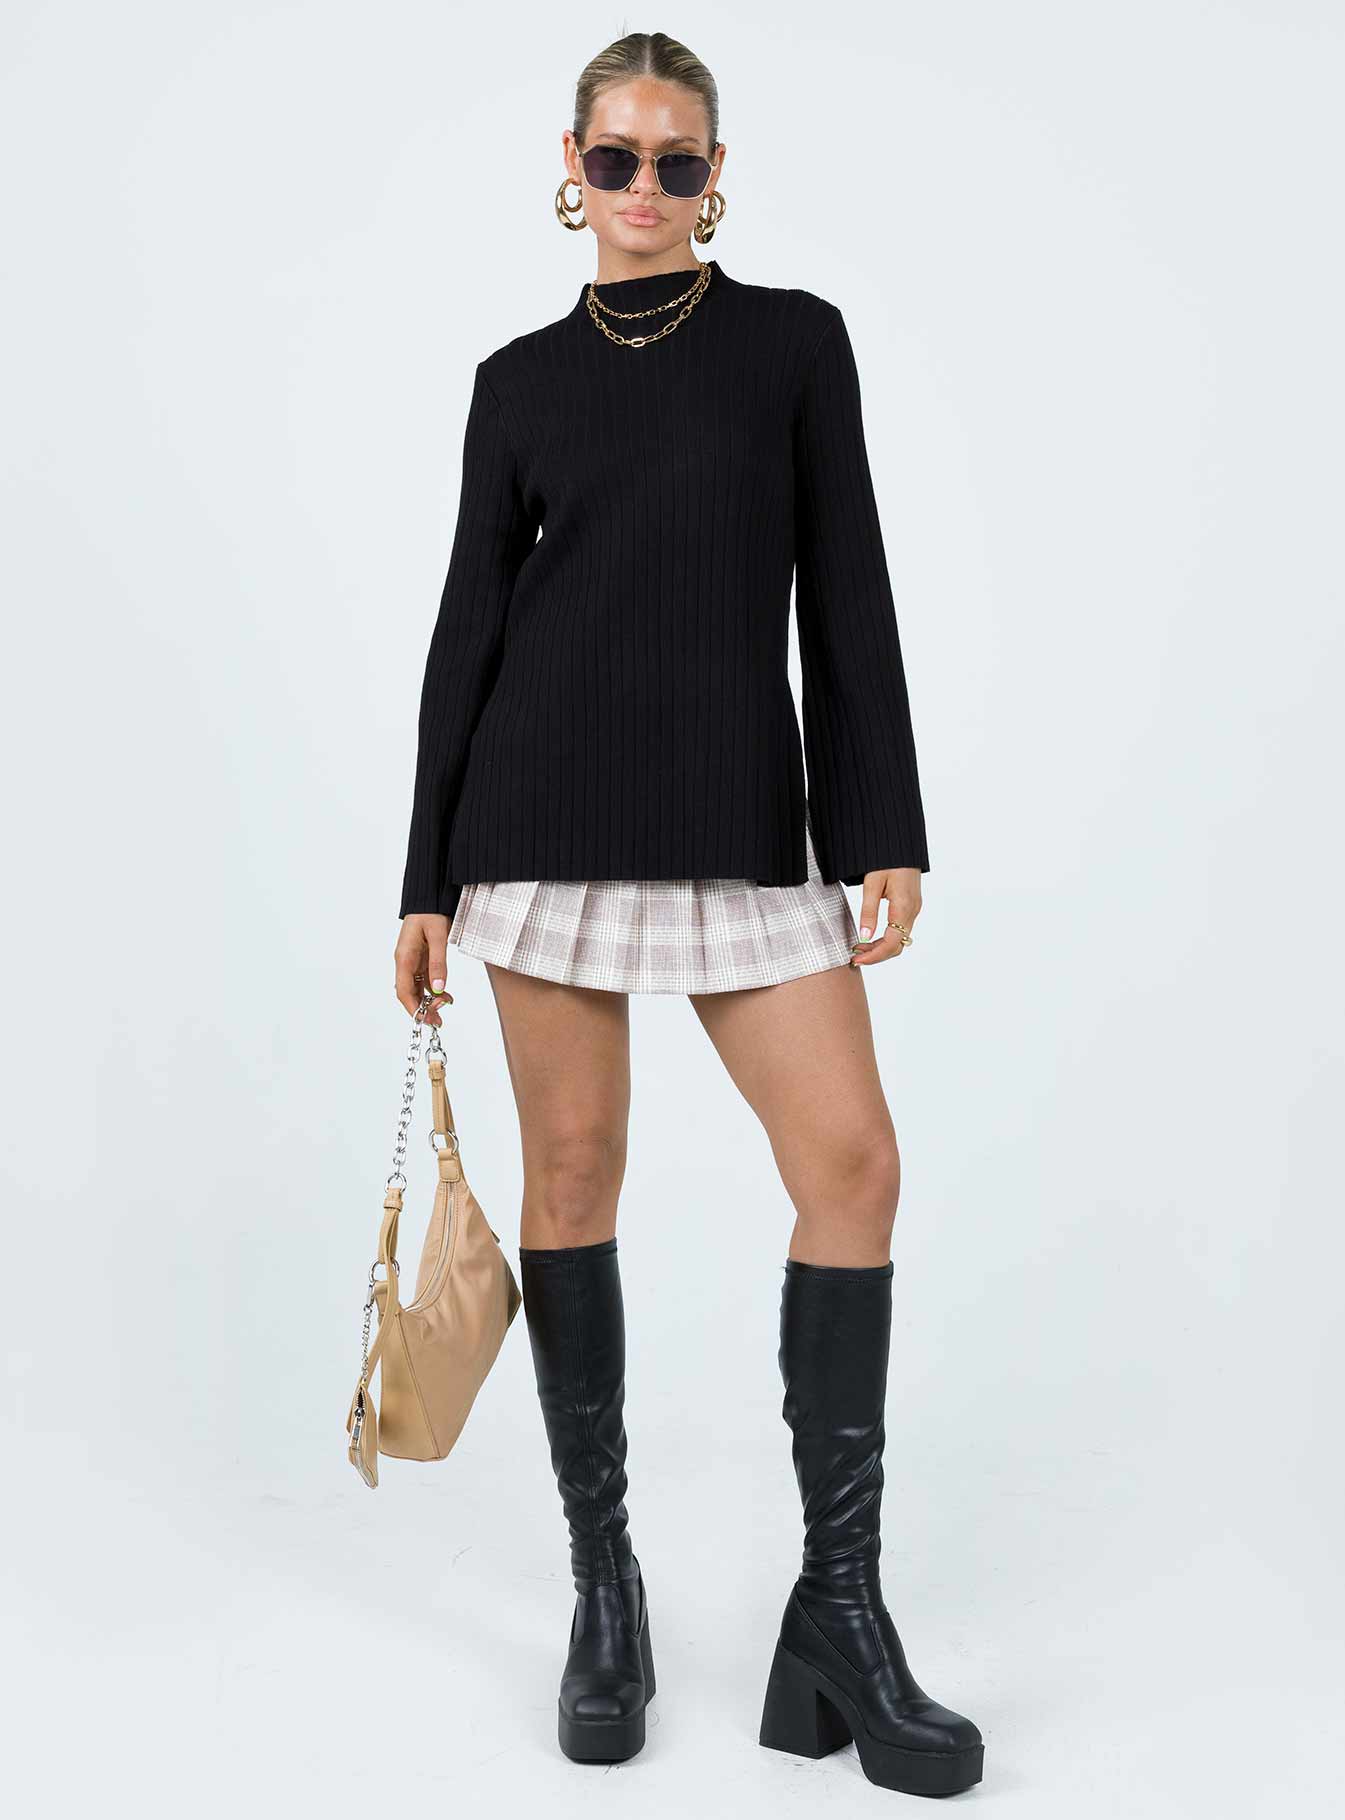 8. Princess Polly Allen Ribbed Black Sweater